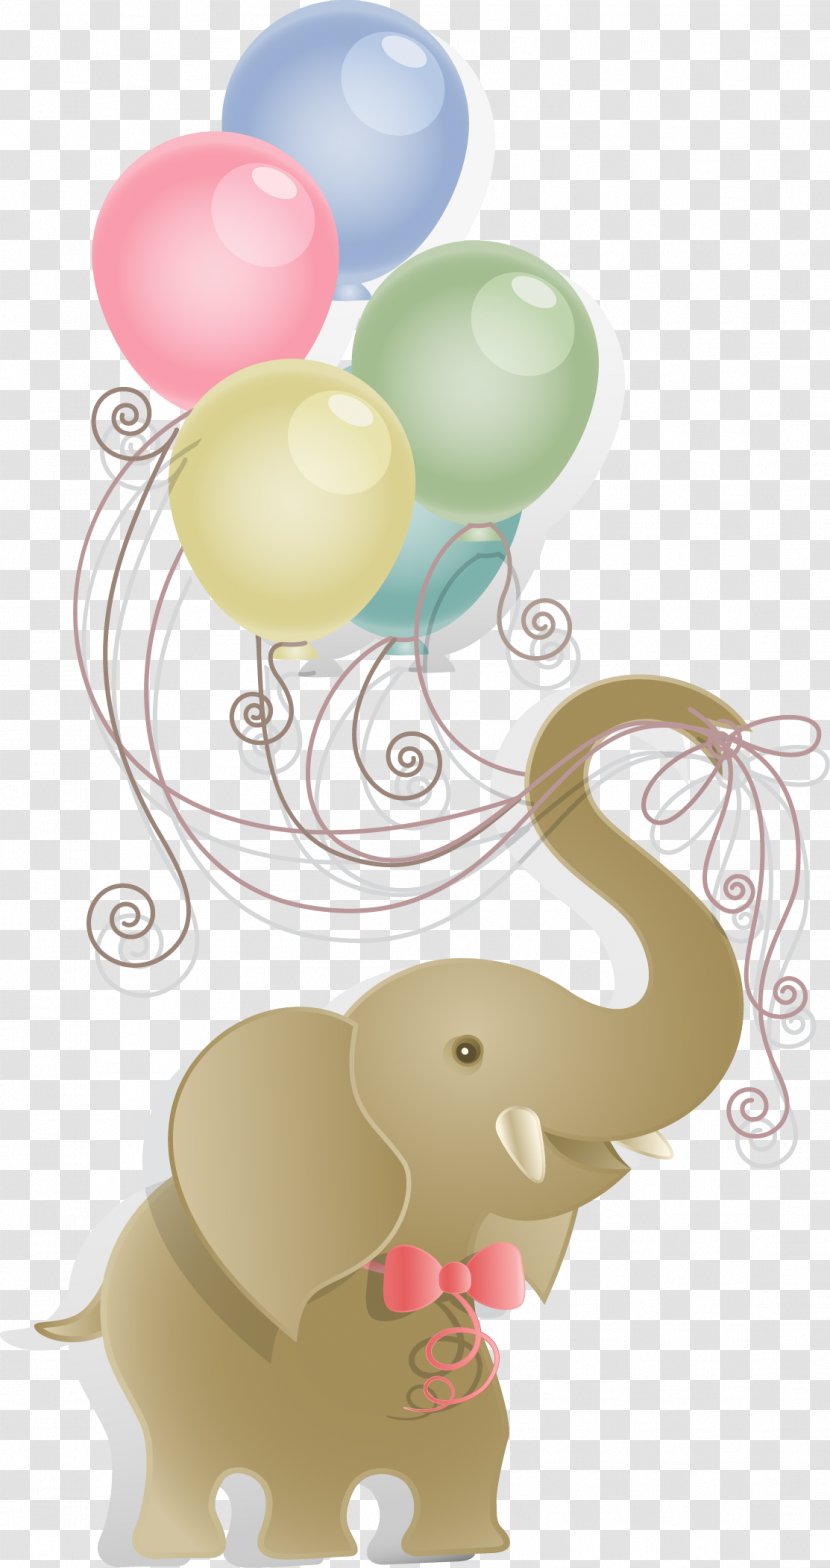 Cartoon Clip Art - Party Supply - Vector Elephant Holding Balloons Transparent PNG